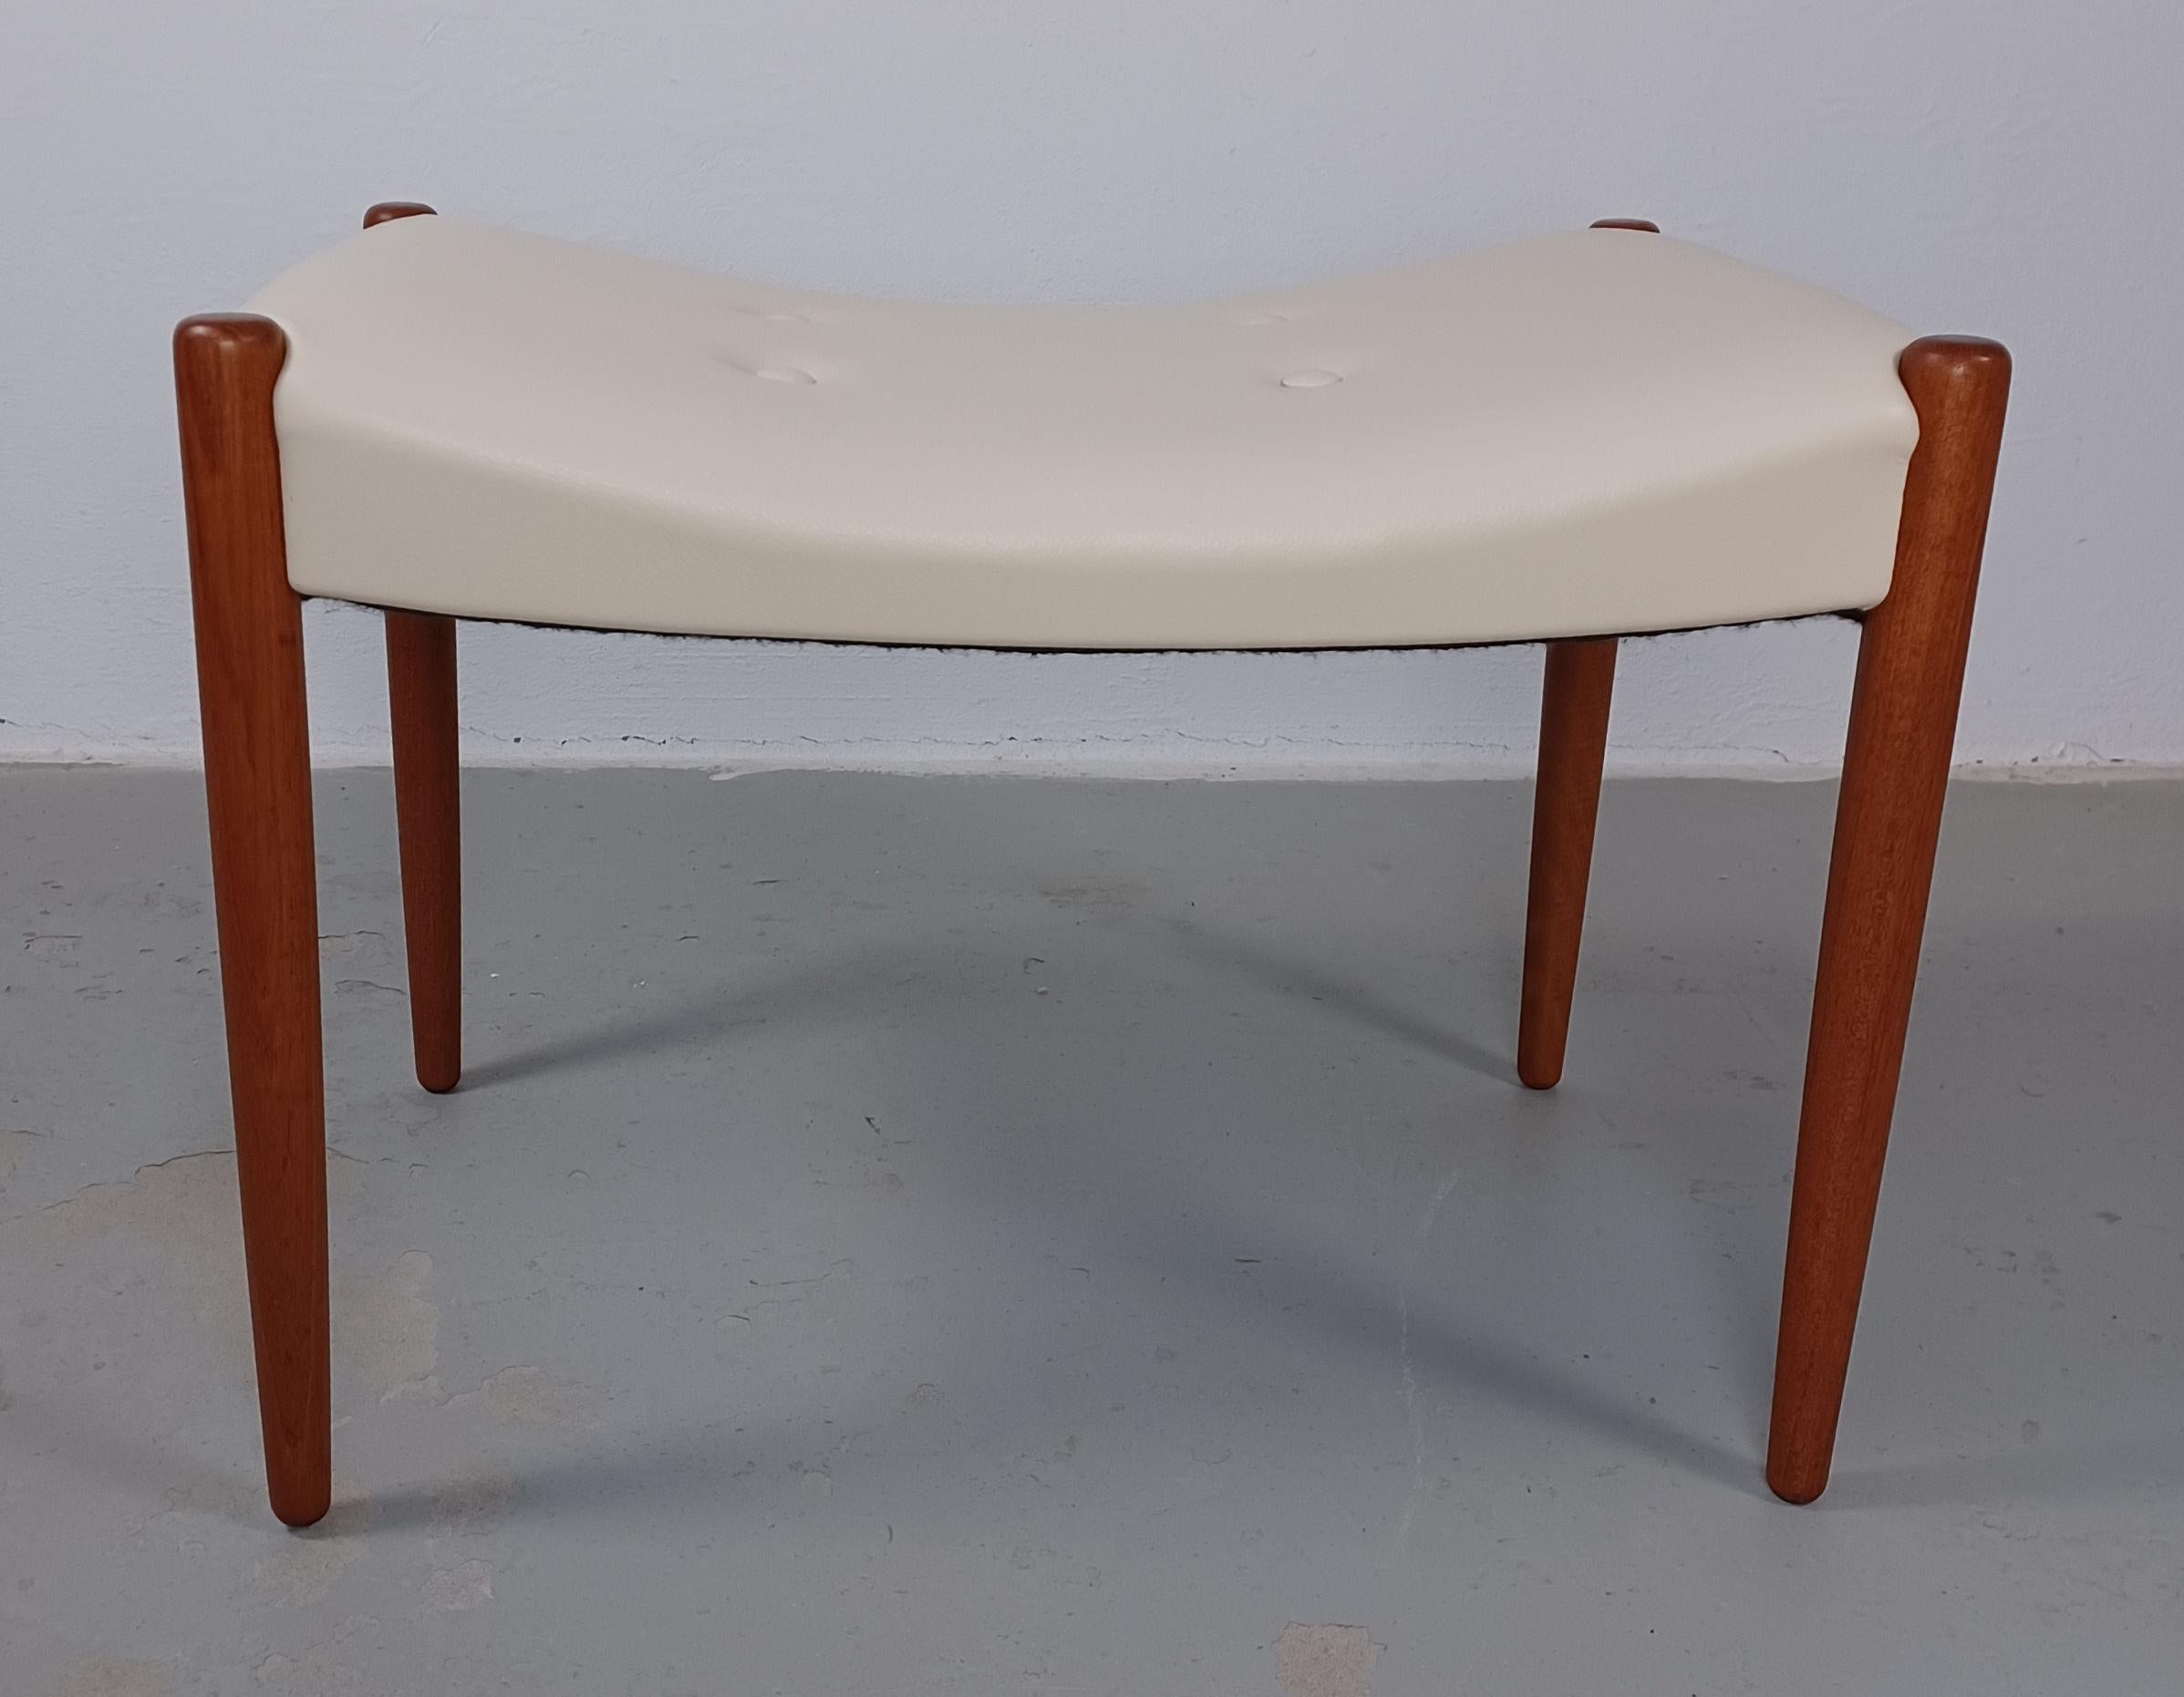 1950´s Reupholstered Danish footstool in teak and cream leather

Danish footstool from the 1960´s in solid teak with elegant curved seat making it comfortable to sit on if needed.

The footstool has been fully restored by our cabinetmaker to ensure